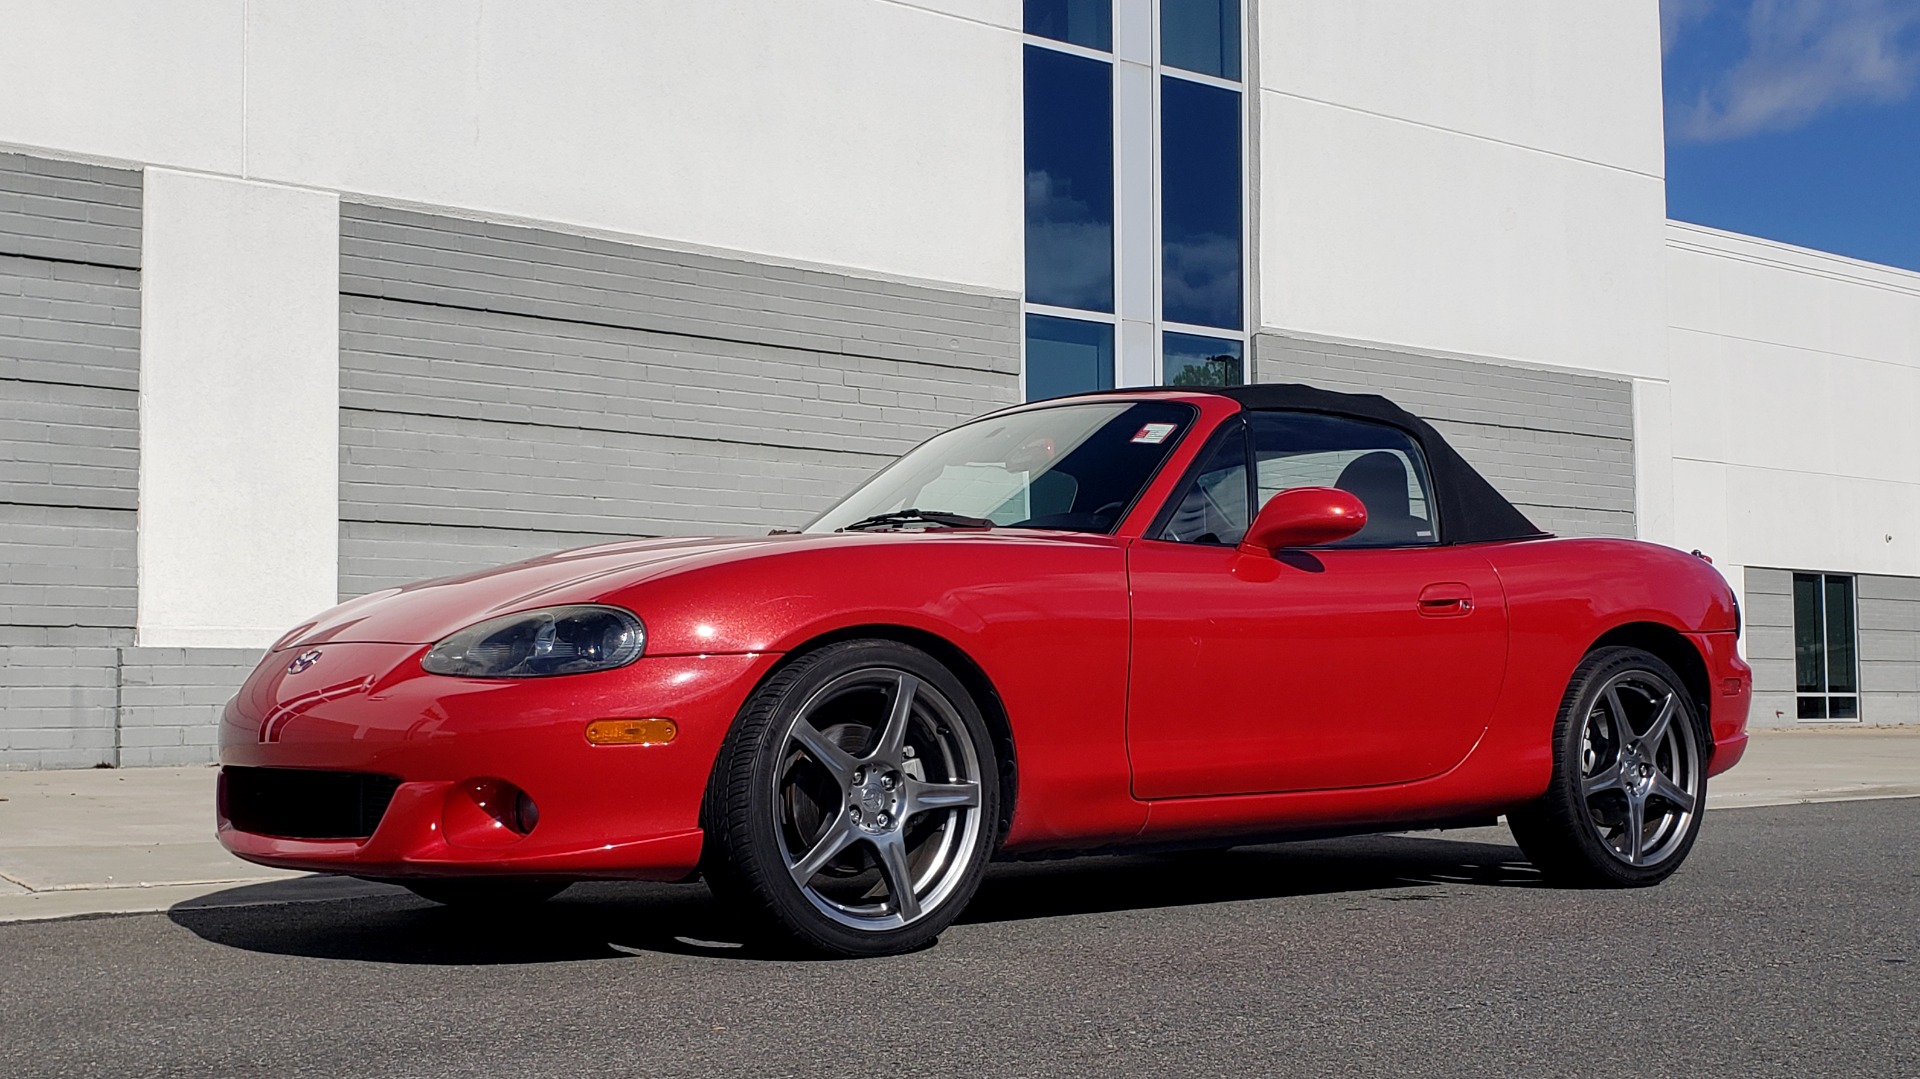 Used 2004 Mazda MX-5 MIATA 2DR CONVERTIBLE MAZDASPEED / GRAND TOURING PKG for sale Sold at Formula Imports in Charlotte NC 28227 13